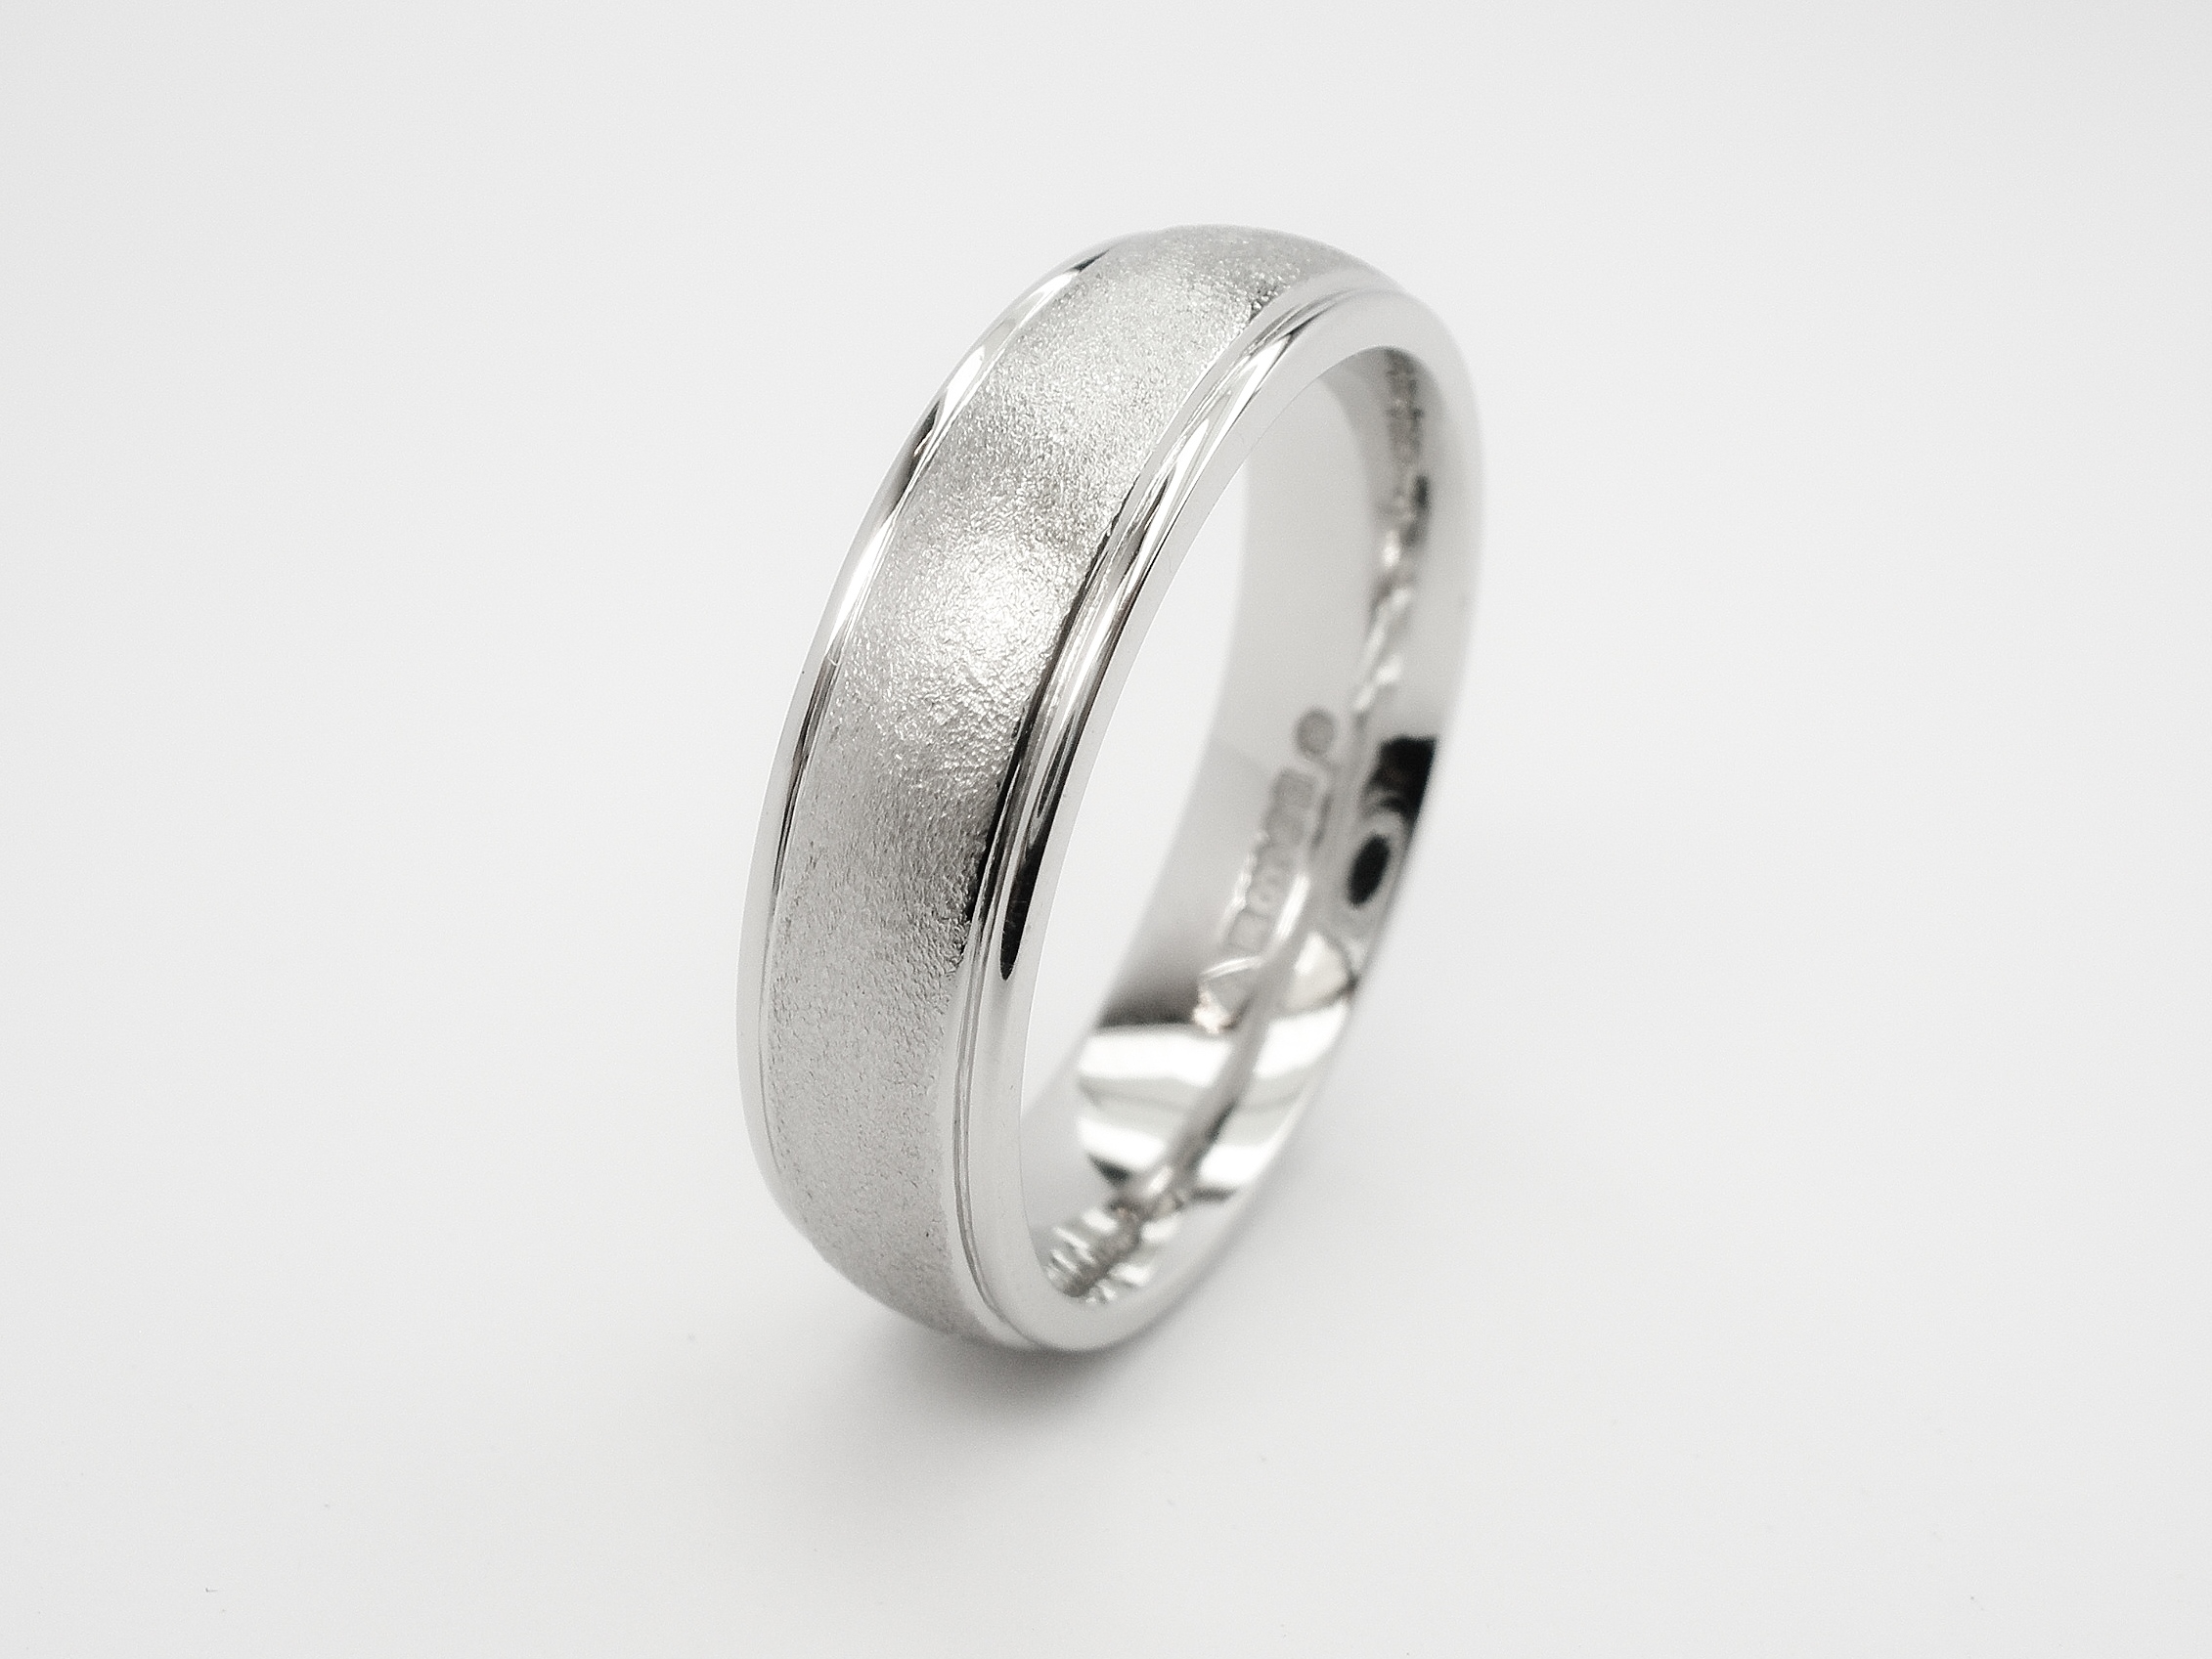 Gents platinum court sectioned wedding ring with a stipple finished centre and polished tram lines on edges.